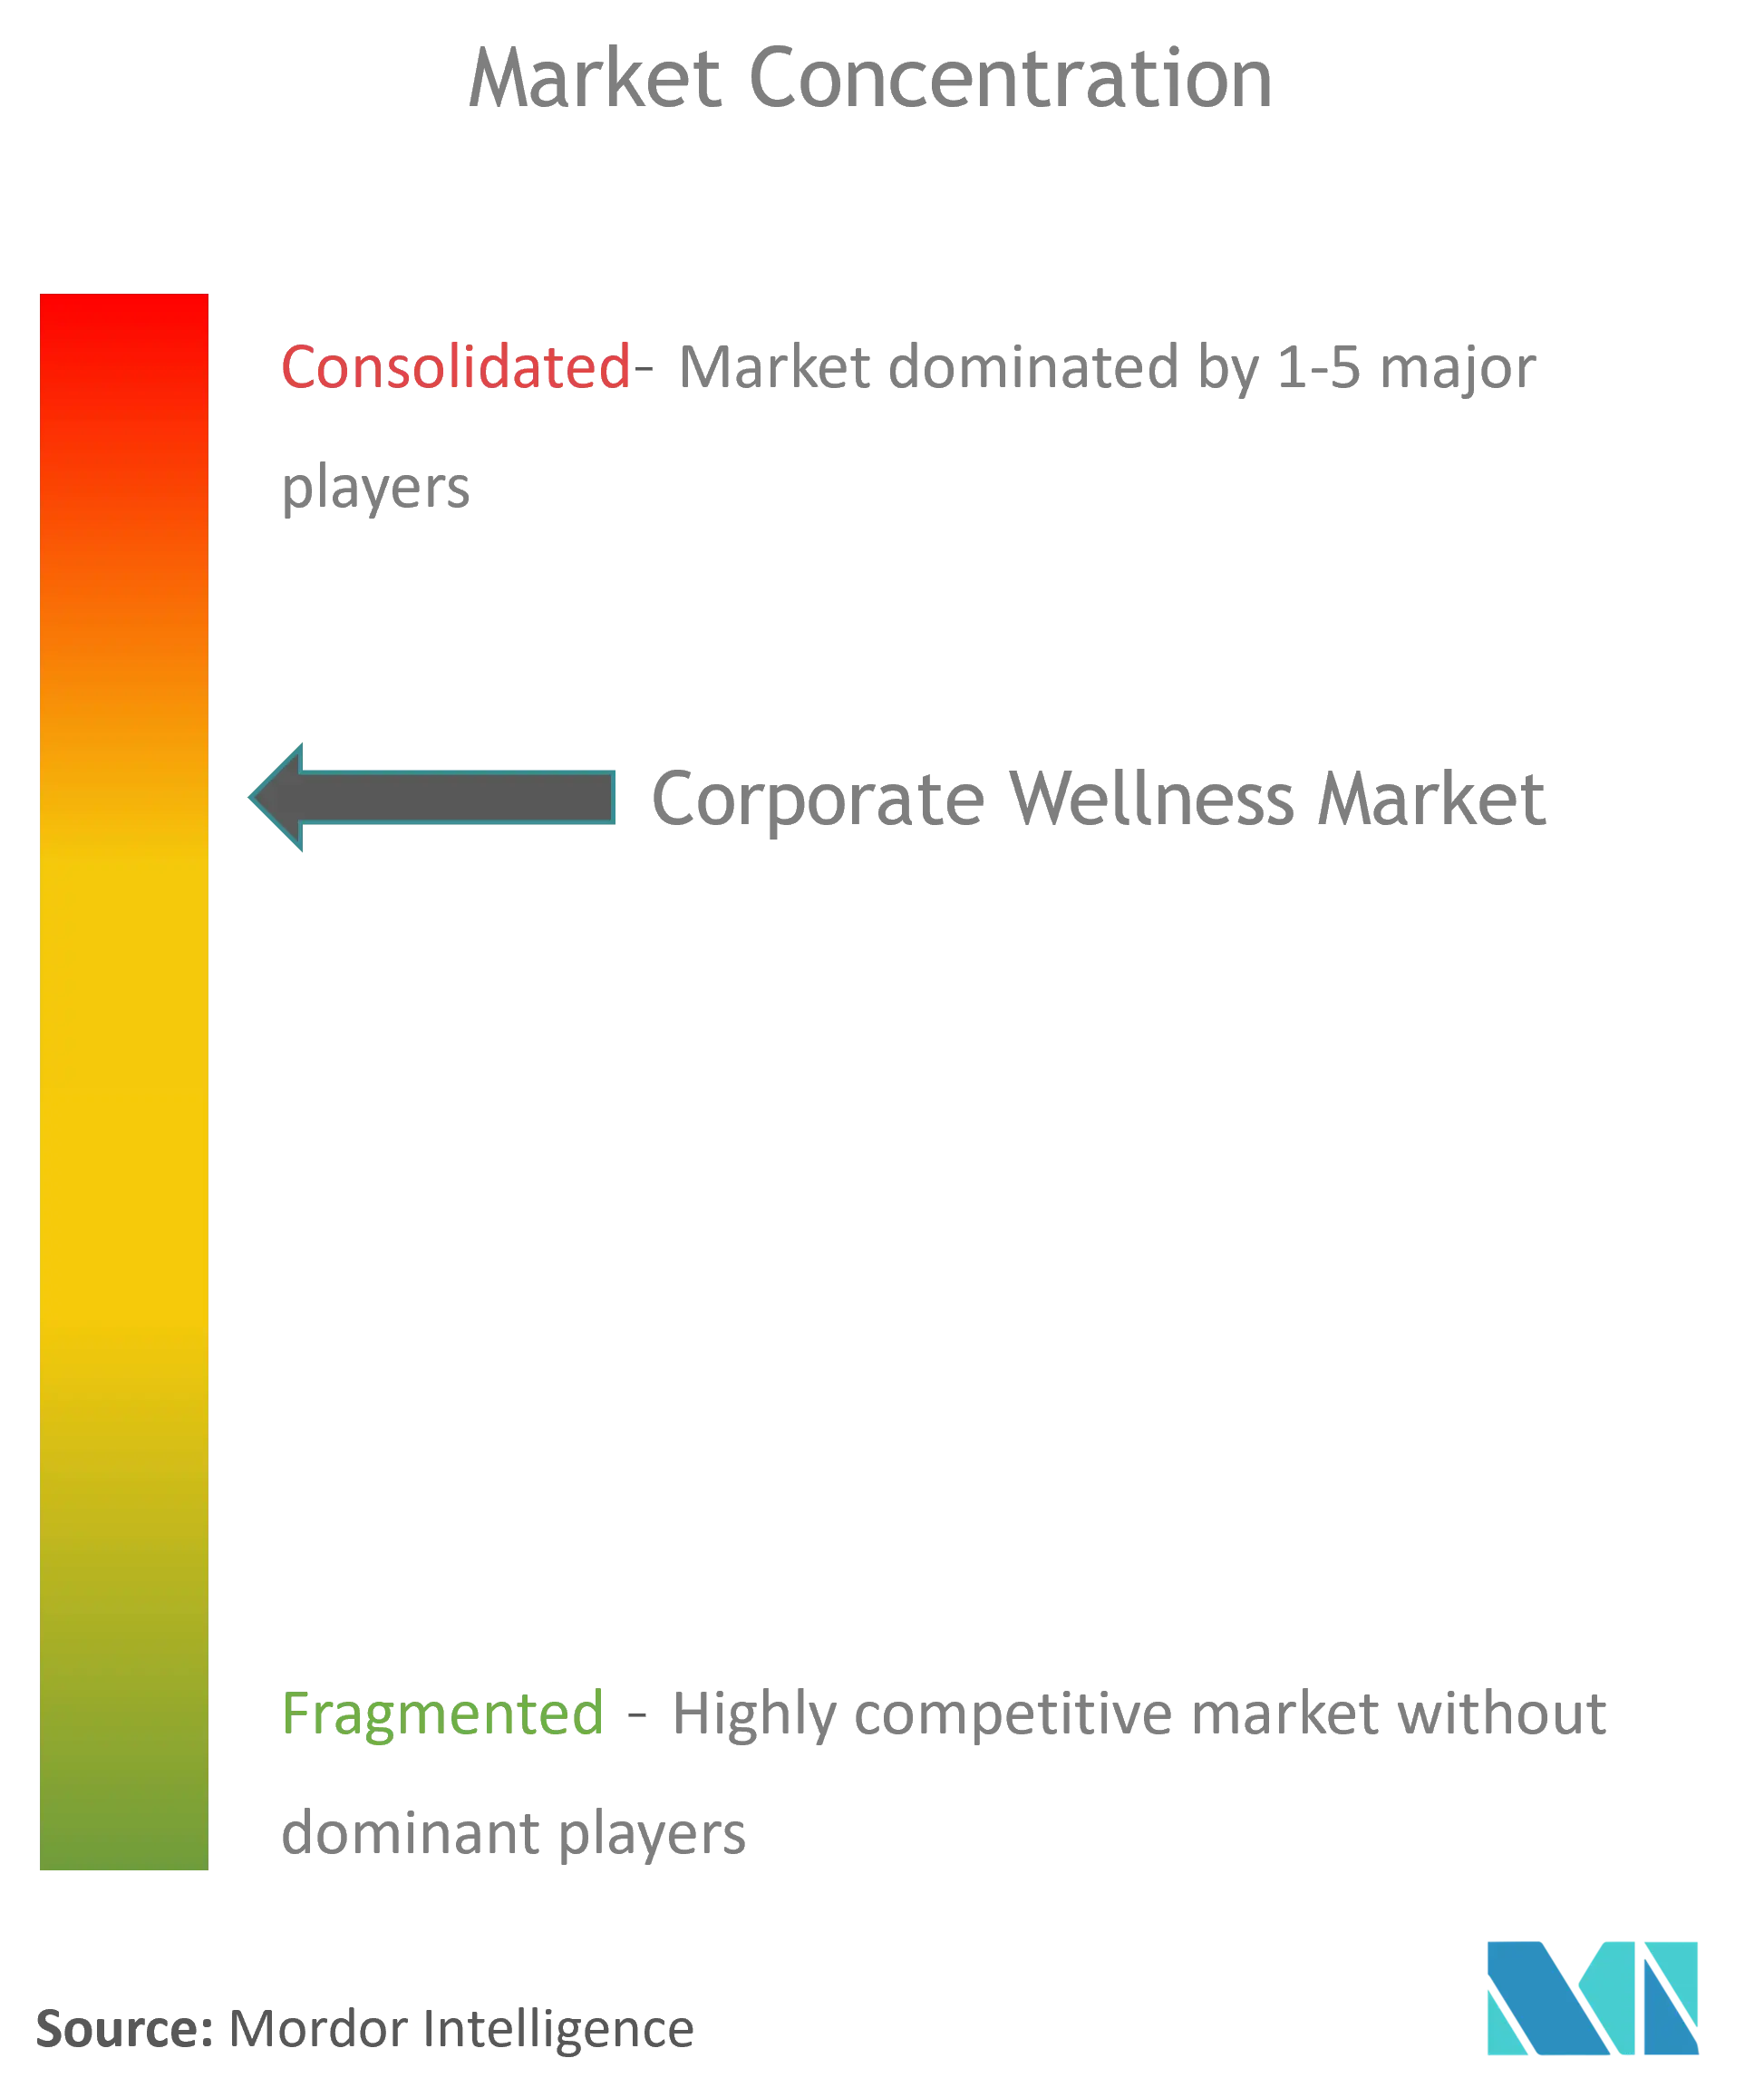 Corporate Wellness Market Concentration